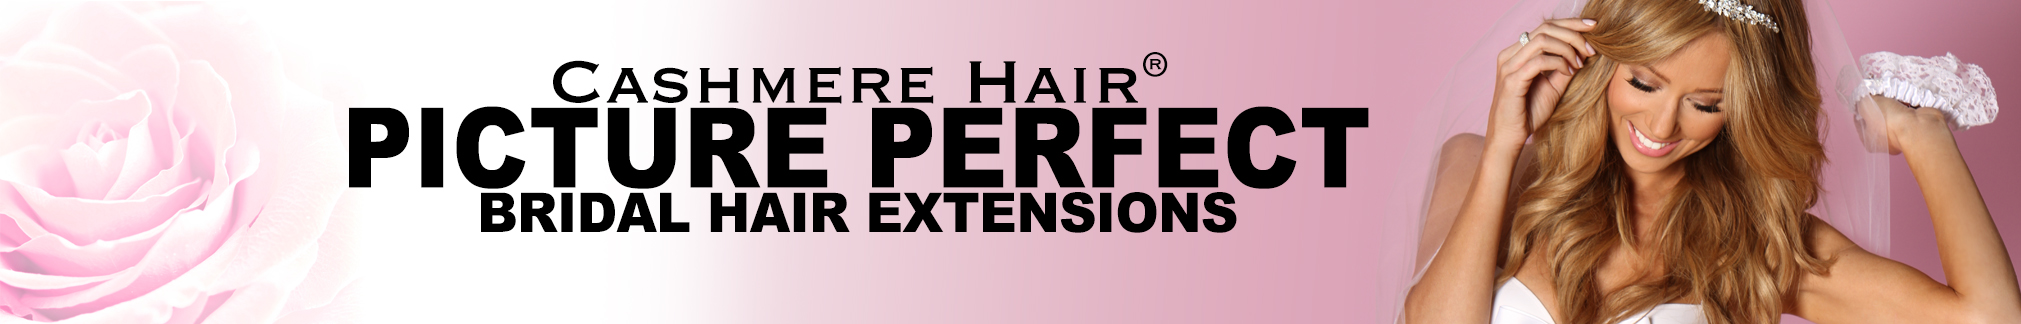 CASHMERE HAIR CLIP IN EXTENSIONS ARE THE BEST CLIP IN HAIR EXTENSIONS FOR ALL BRIDAL HAIR STYLES